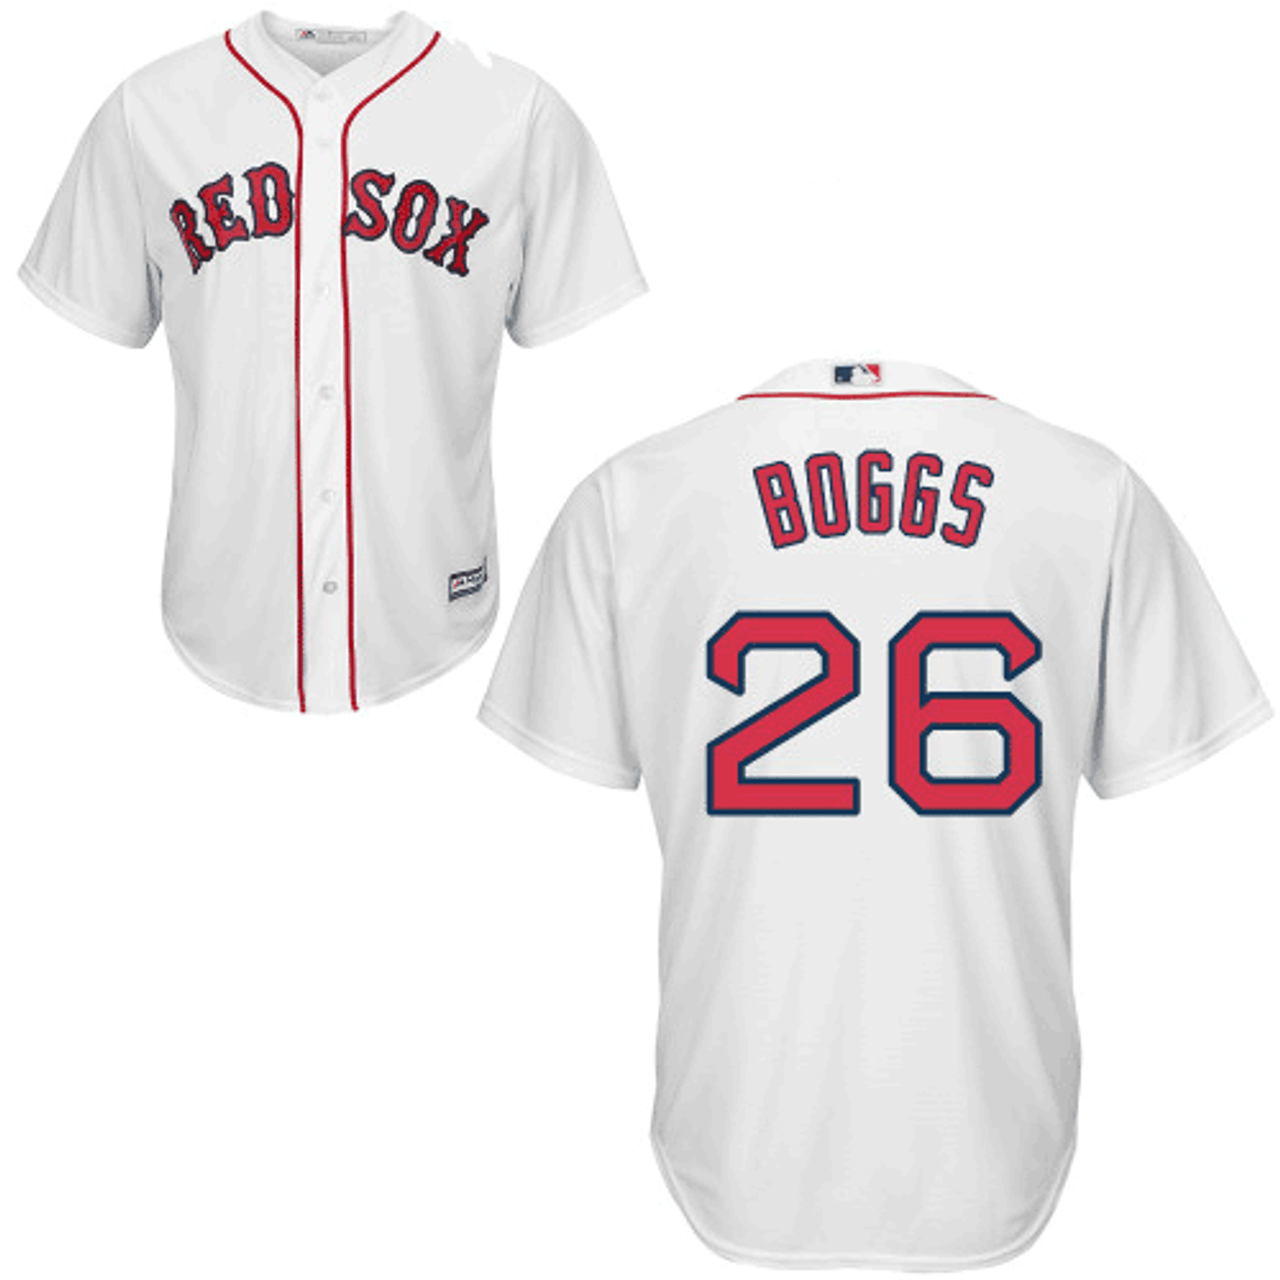 Wade Boggs Youth Jersey - Boston Red Sox Replica Kids Home Jersey